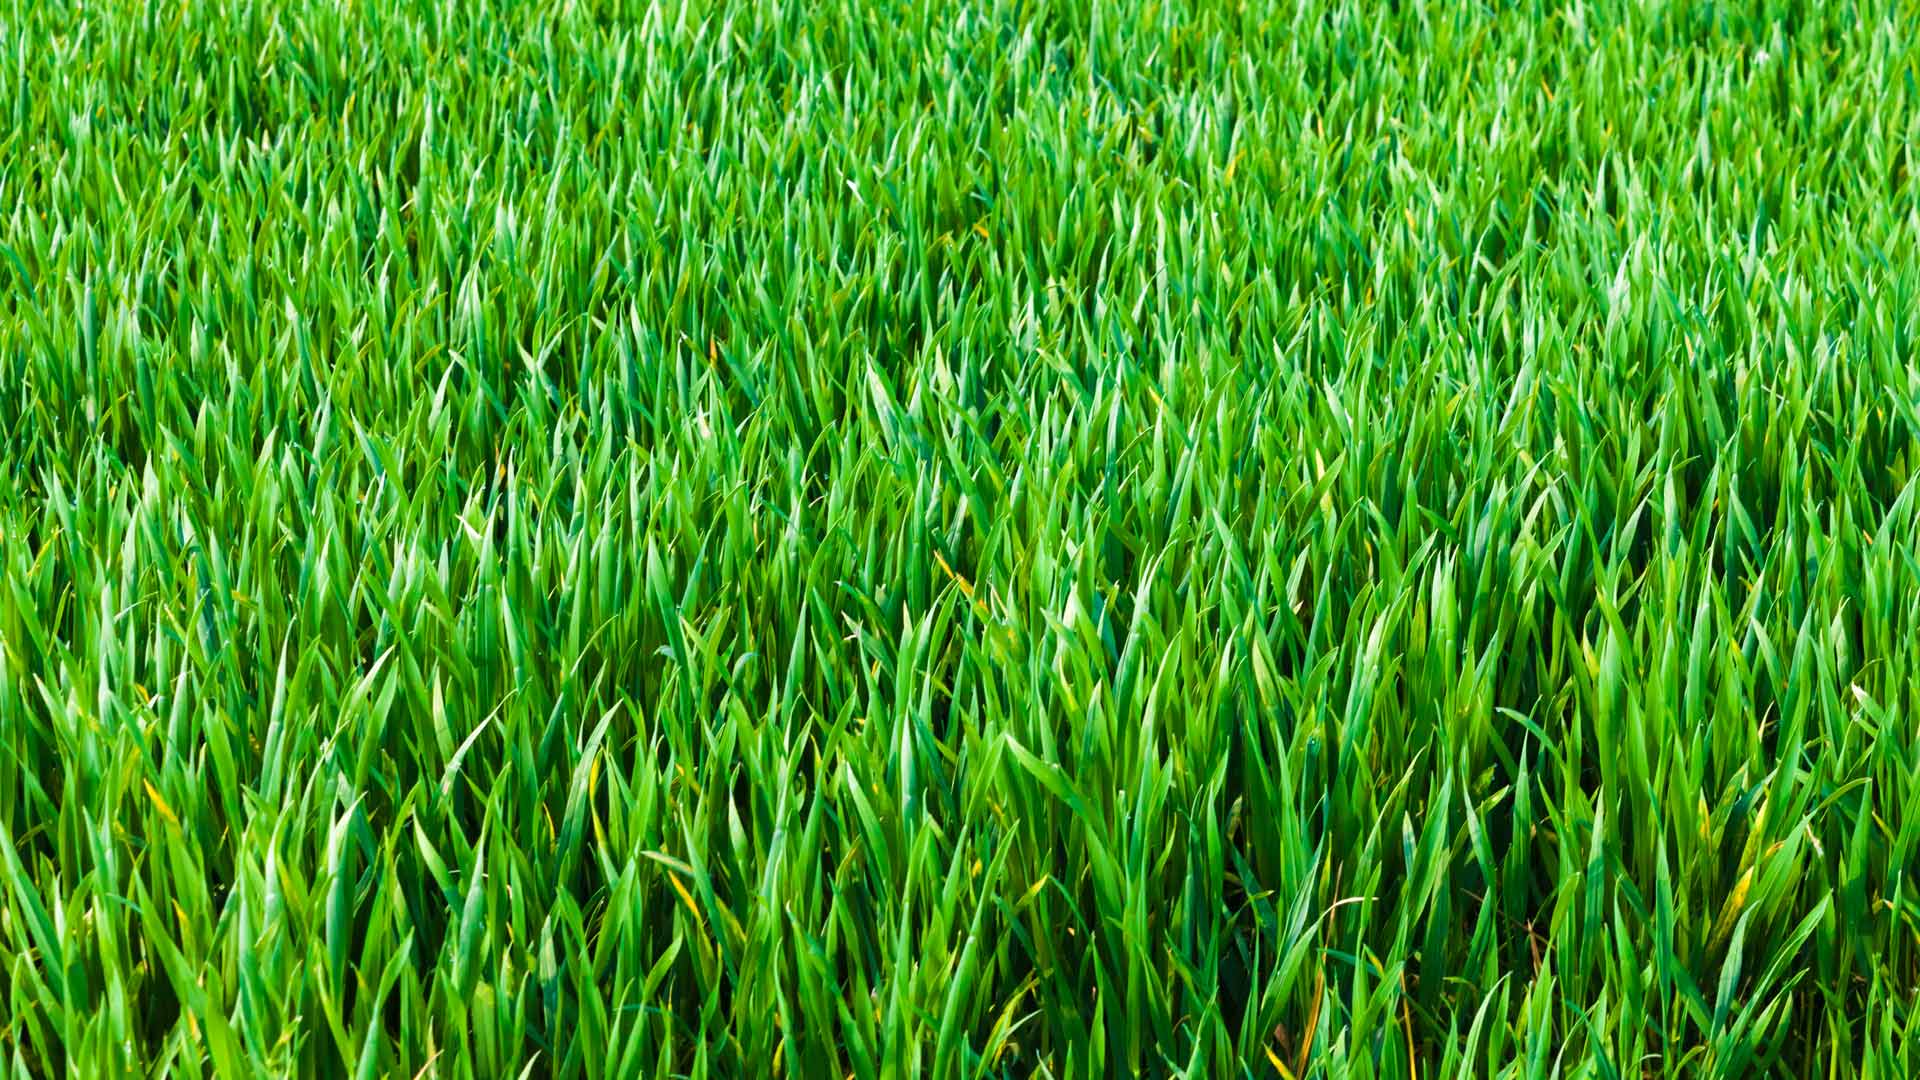 Healthy grass blades from a serviced lawn in North Austin, TX.